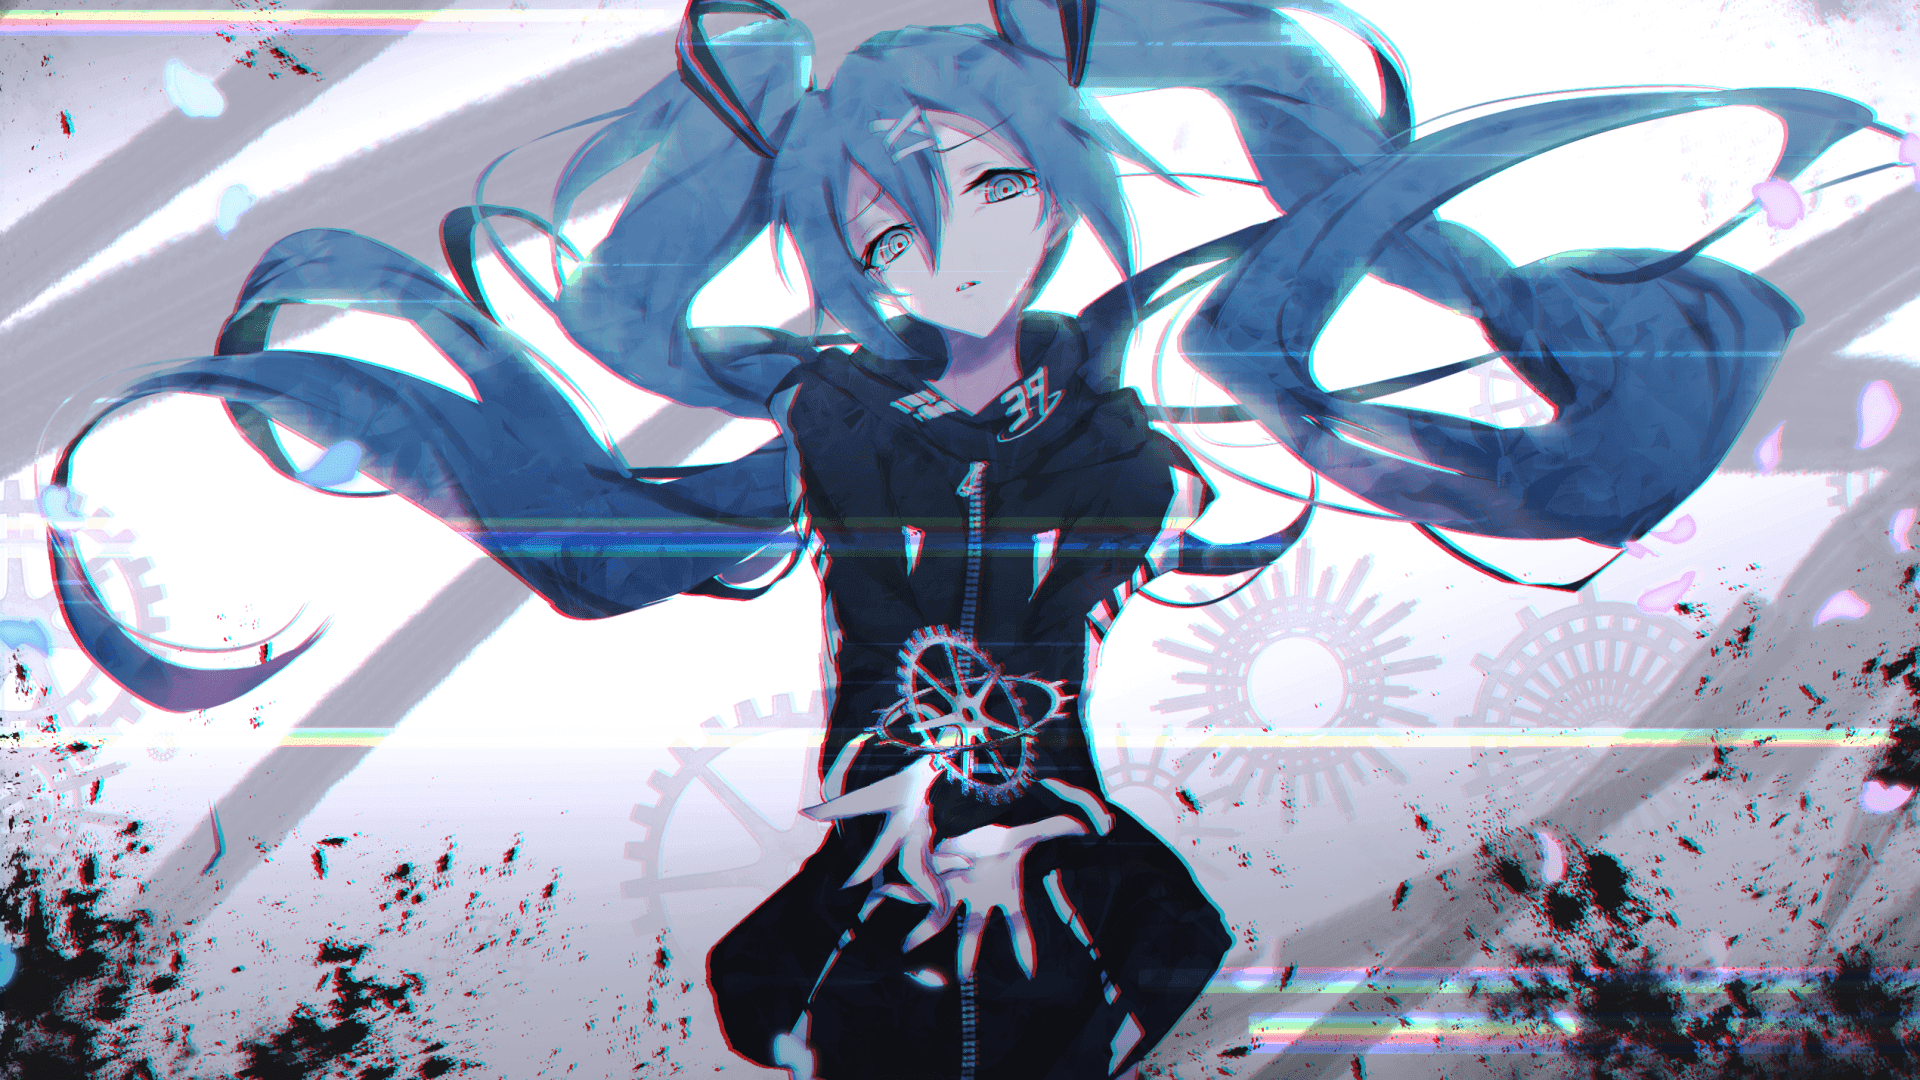 The iconic Hatsune Miku sparkling with music.